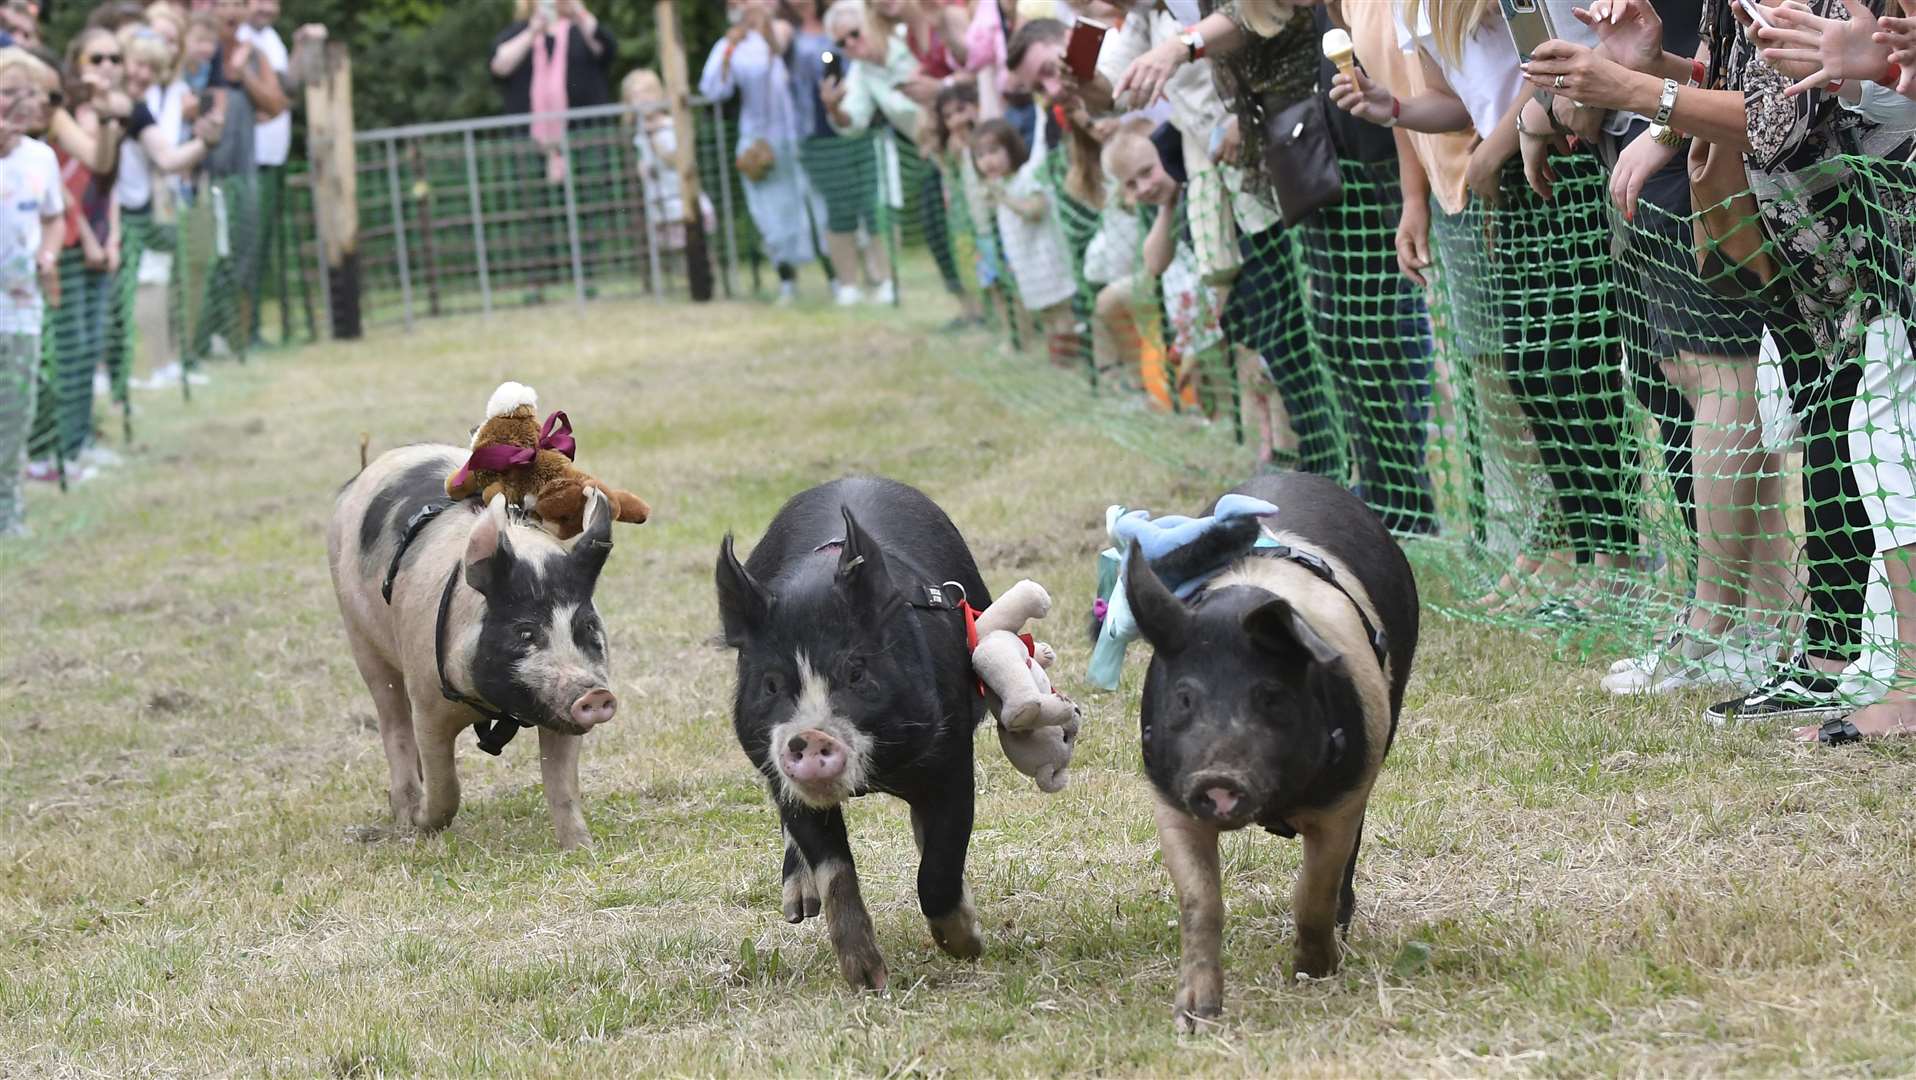 Pig racing at the Brogdale annual Cherry Fair Picture: Tony Flashman